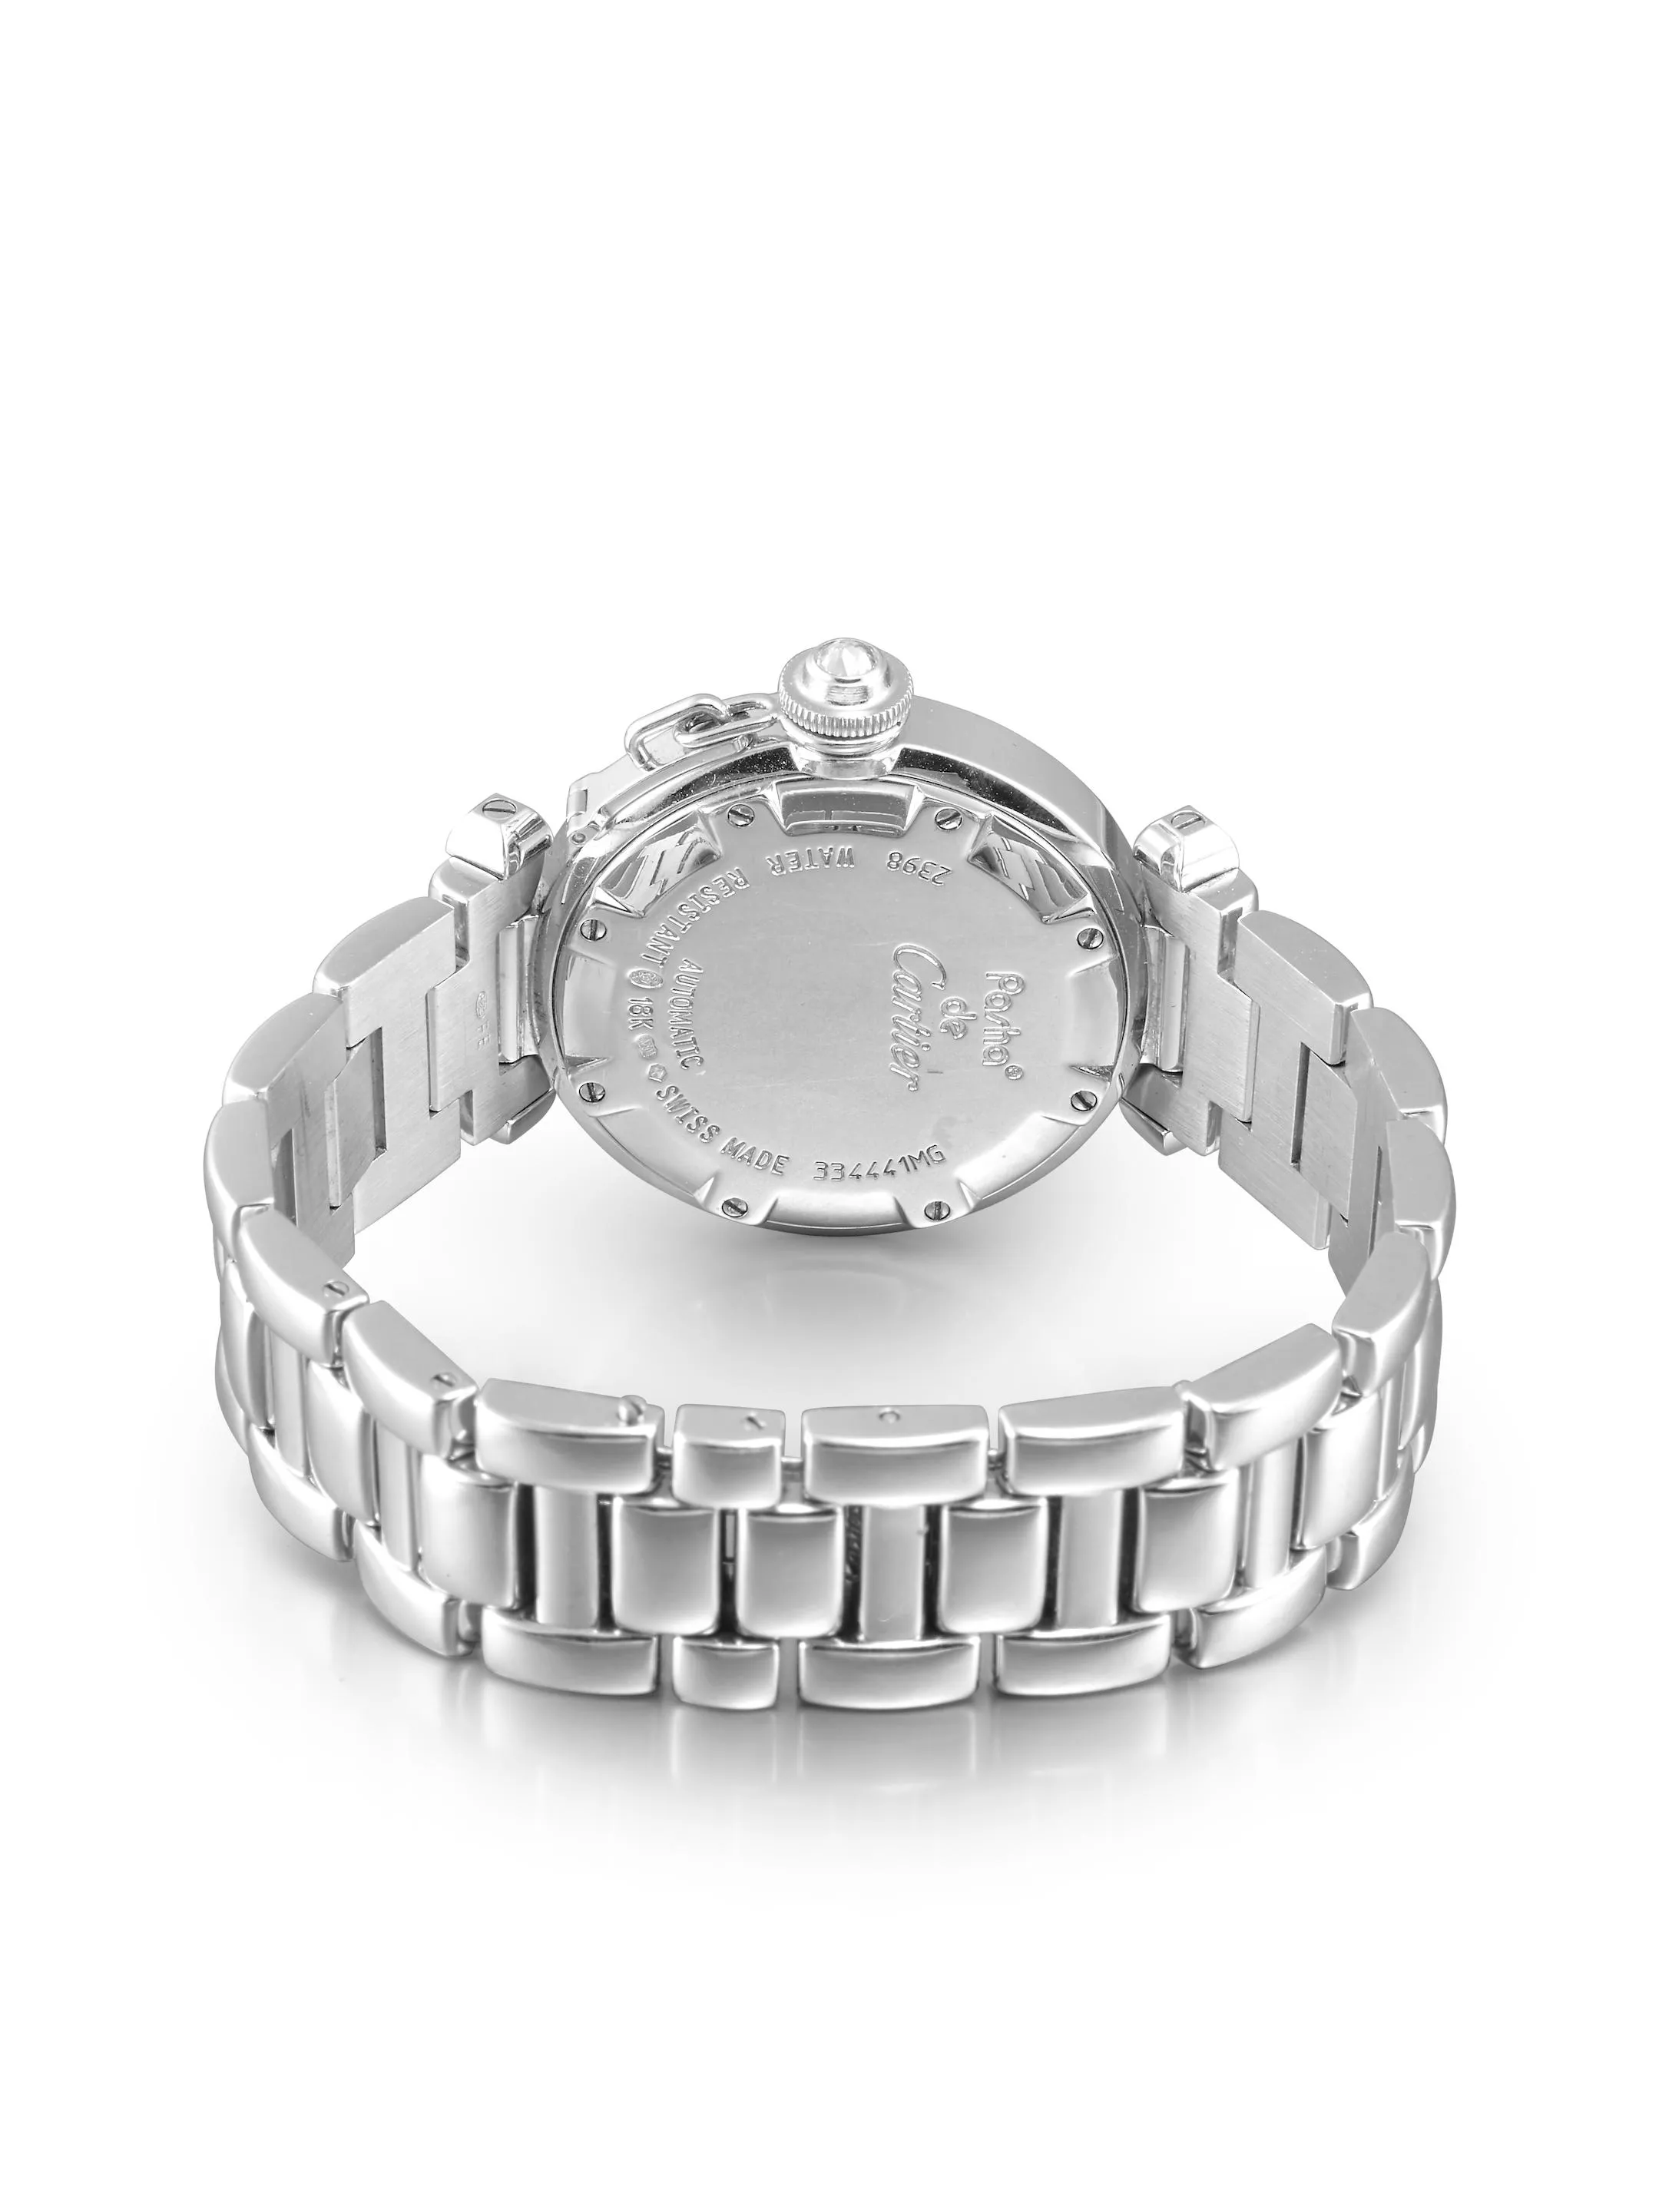 Cartier Pasha 2398 32mm White gold Silver 2